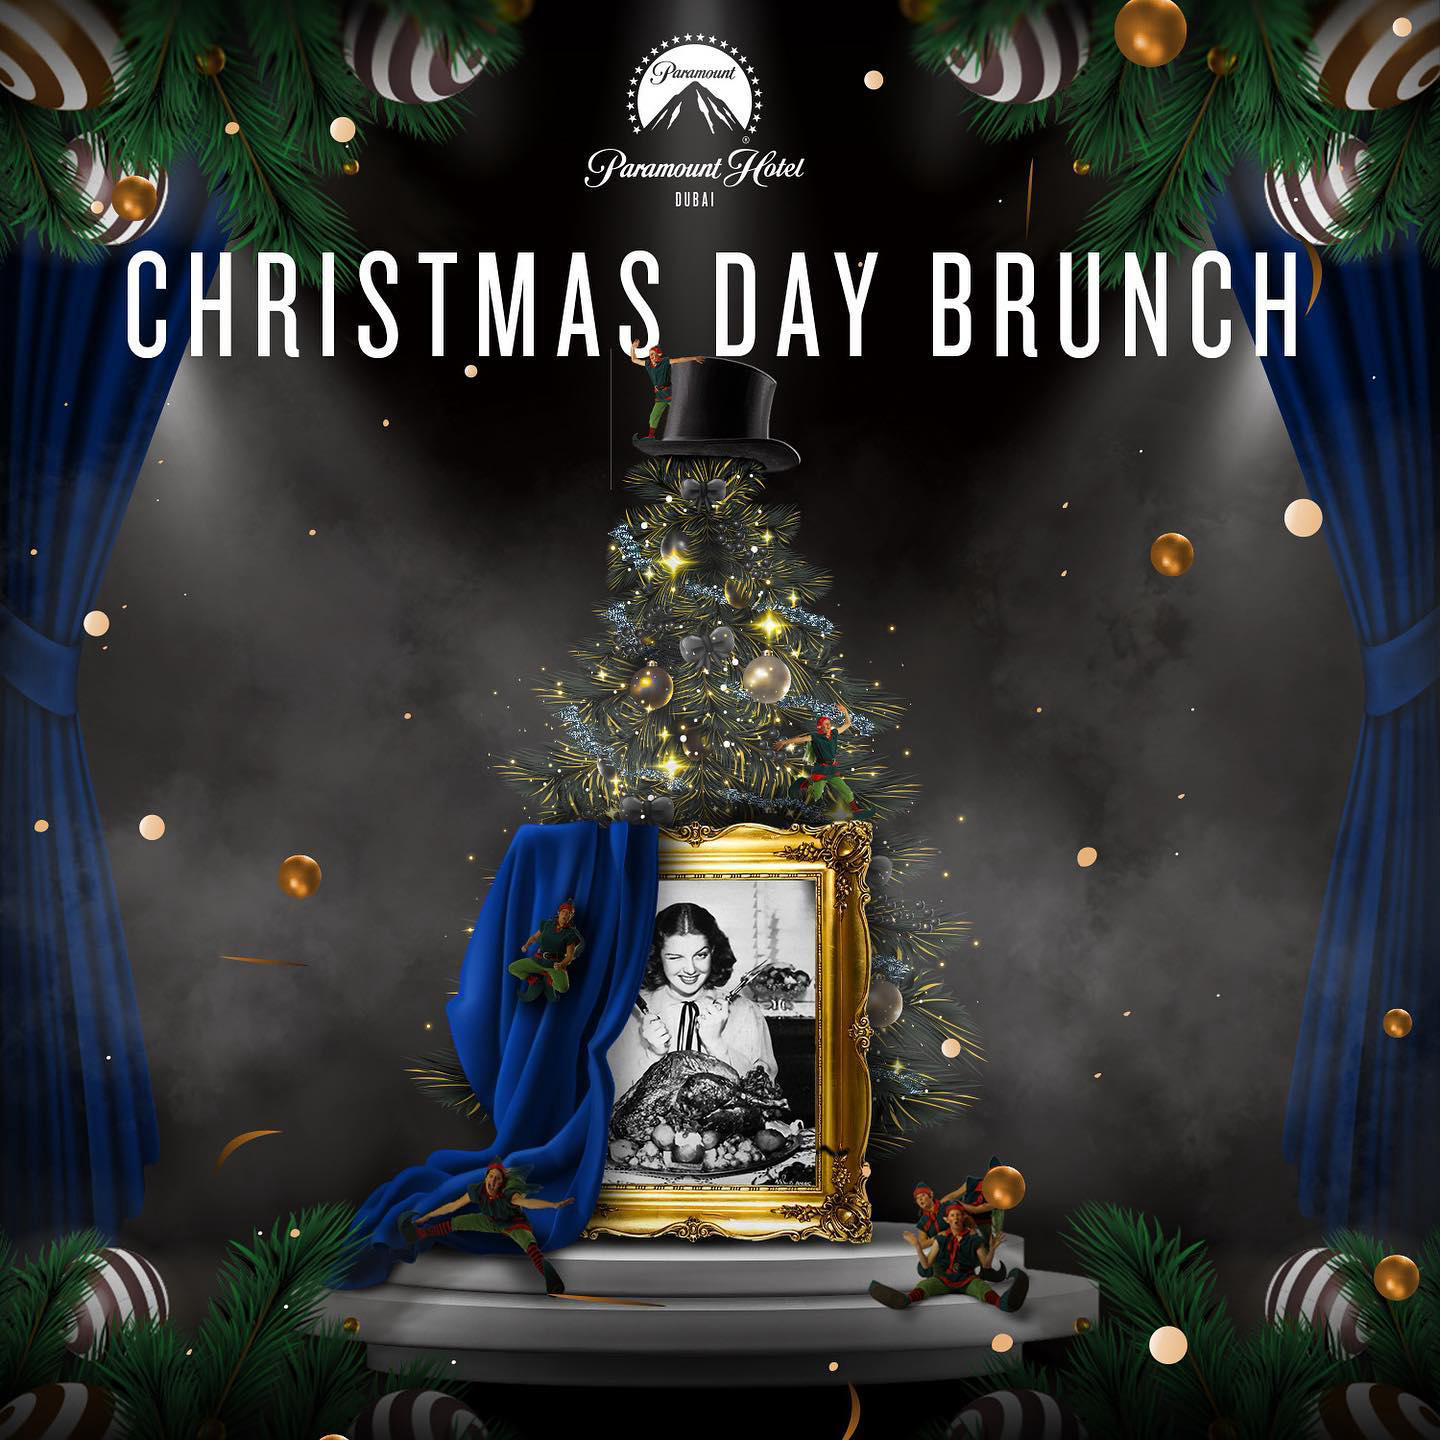 Paramount Hotel Dubai - Join us for the only Paramount Christmas Production Day Brunch and Show at T